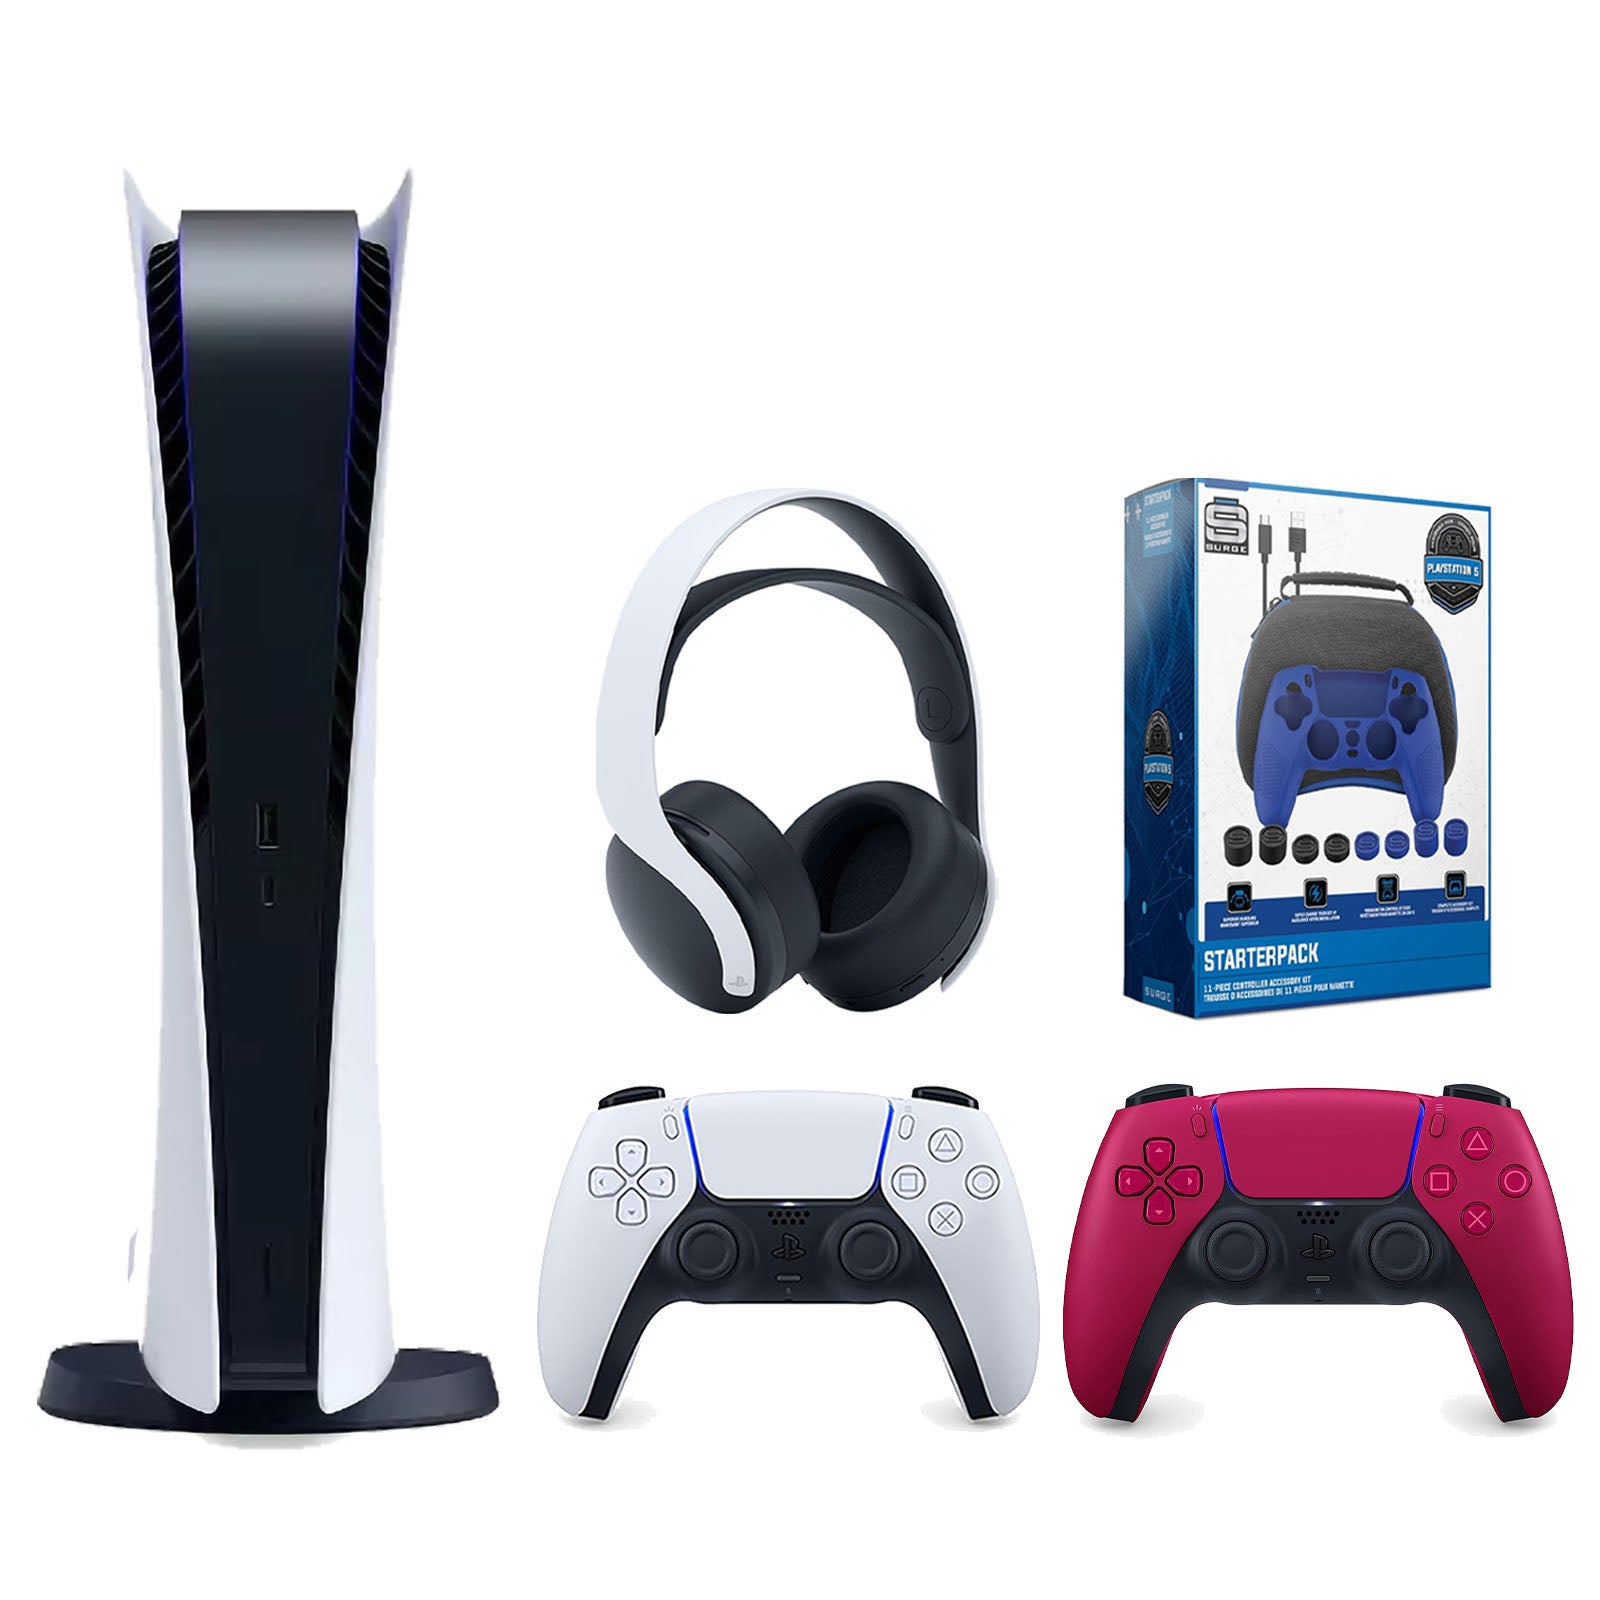 Sony Playstation 5 Digital Edition Console with Extra Red Controller, White PULSE 3D Headset and Surge Pro Gamer Starter Pack 11-Piece Accessory Bundle - Pro-Distributing